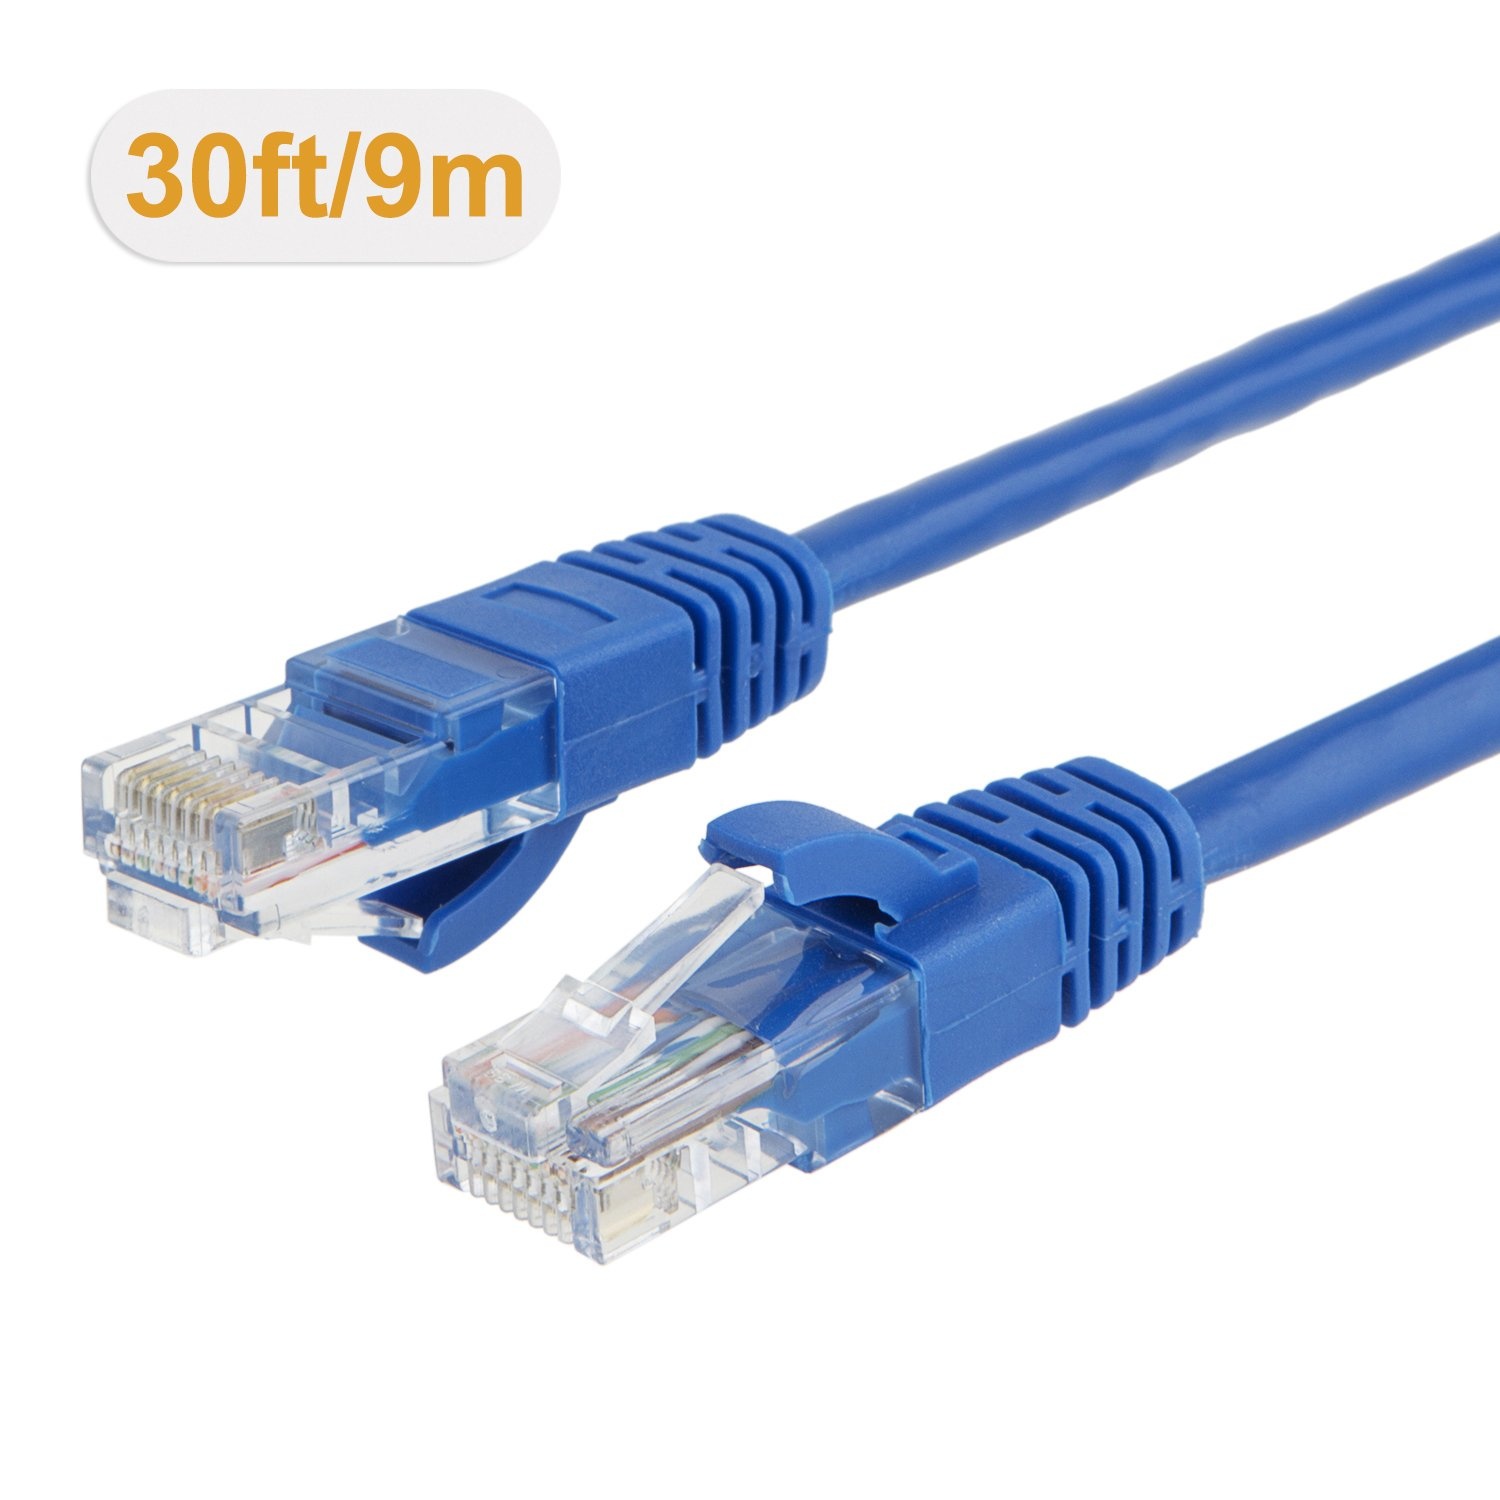 China Factory Supply Cat6 Connector Plug Cat 6 Ethernet Cable 75 Feet 22 9 Meters Cl0141 Cablecreation Manufacturer And Supplier Cablecreation 1.75 meters equals 5.74 feet, because 1 meter is equal to roughly 3.28 foot. www cablecreation com